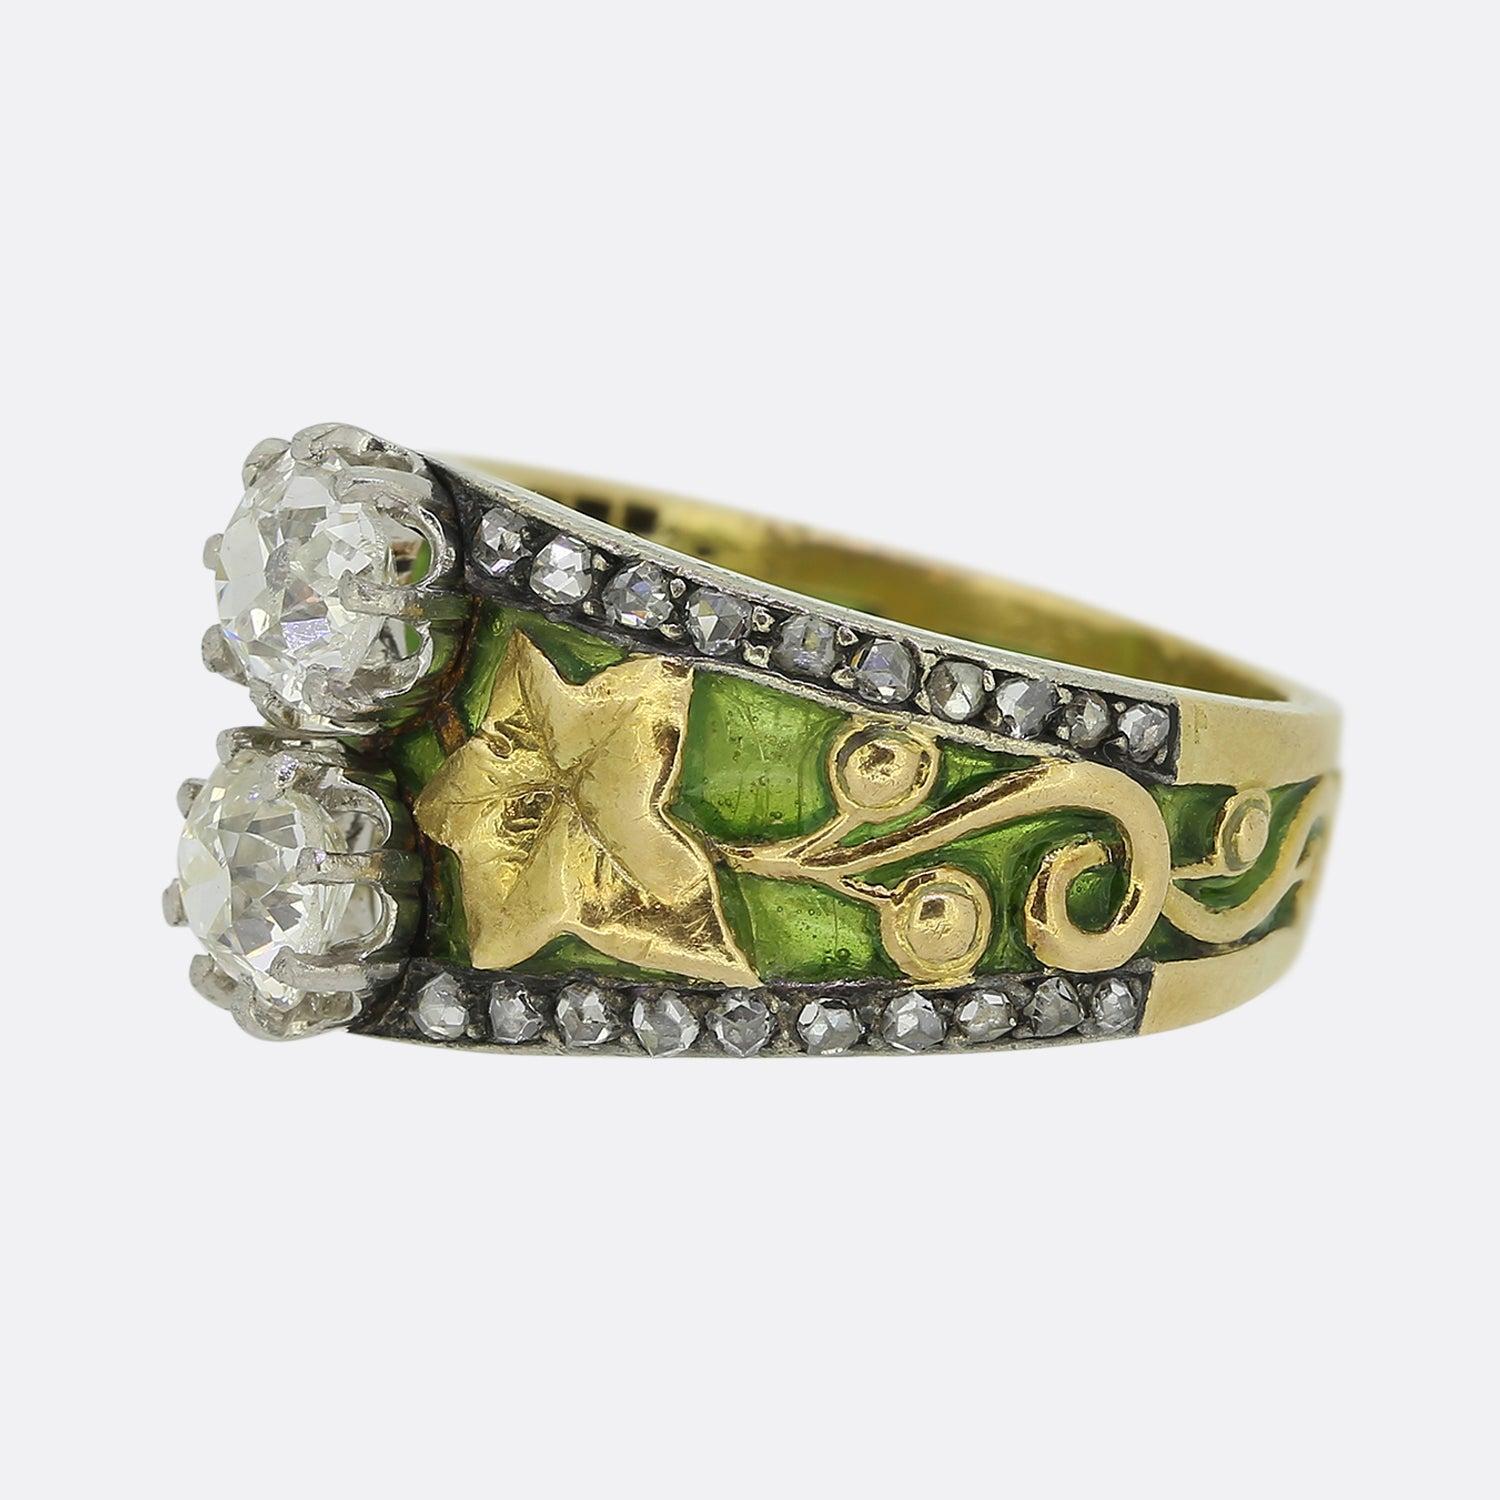 Here we have a truly stunning French ring that dates back to the early 20th century. The ring has been crafted in 18ct yellow gold, platinum and enamel. Using the vitreous enamelling technique known as plique-à-hour the maker has allowed light to